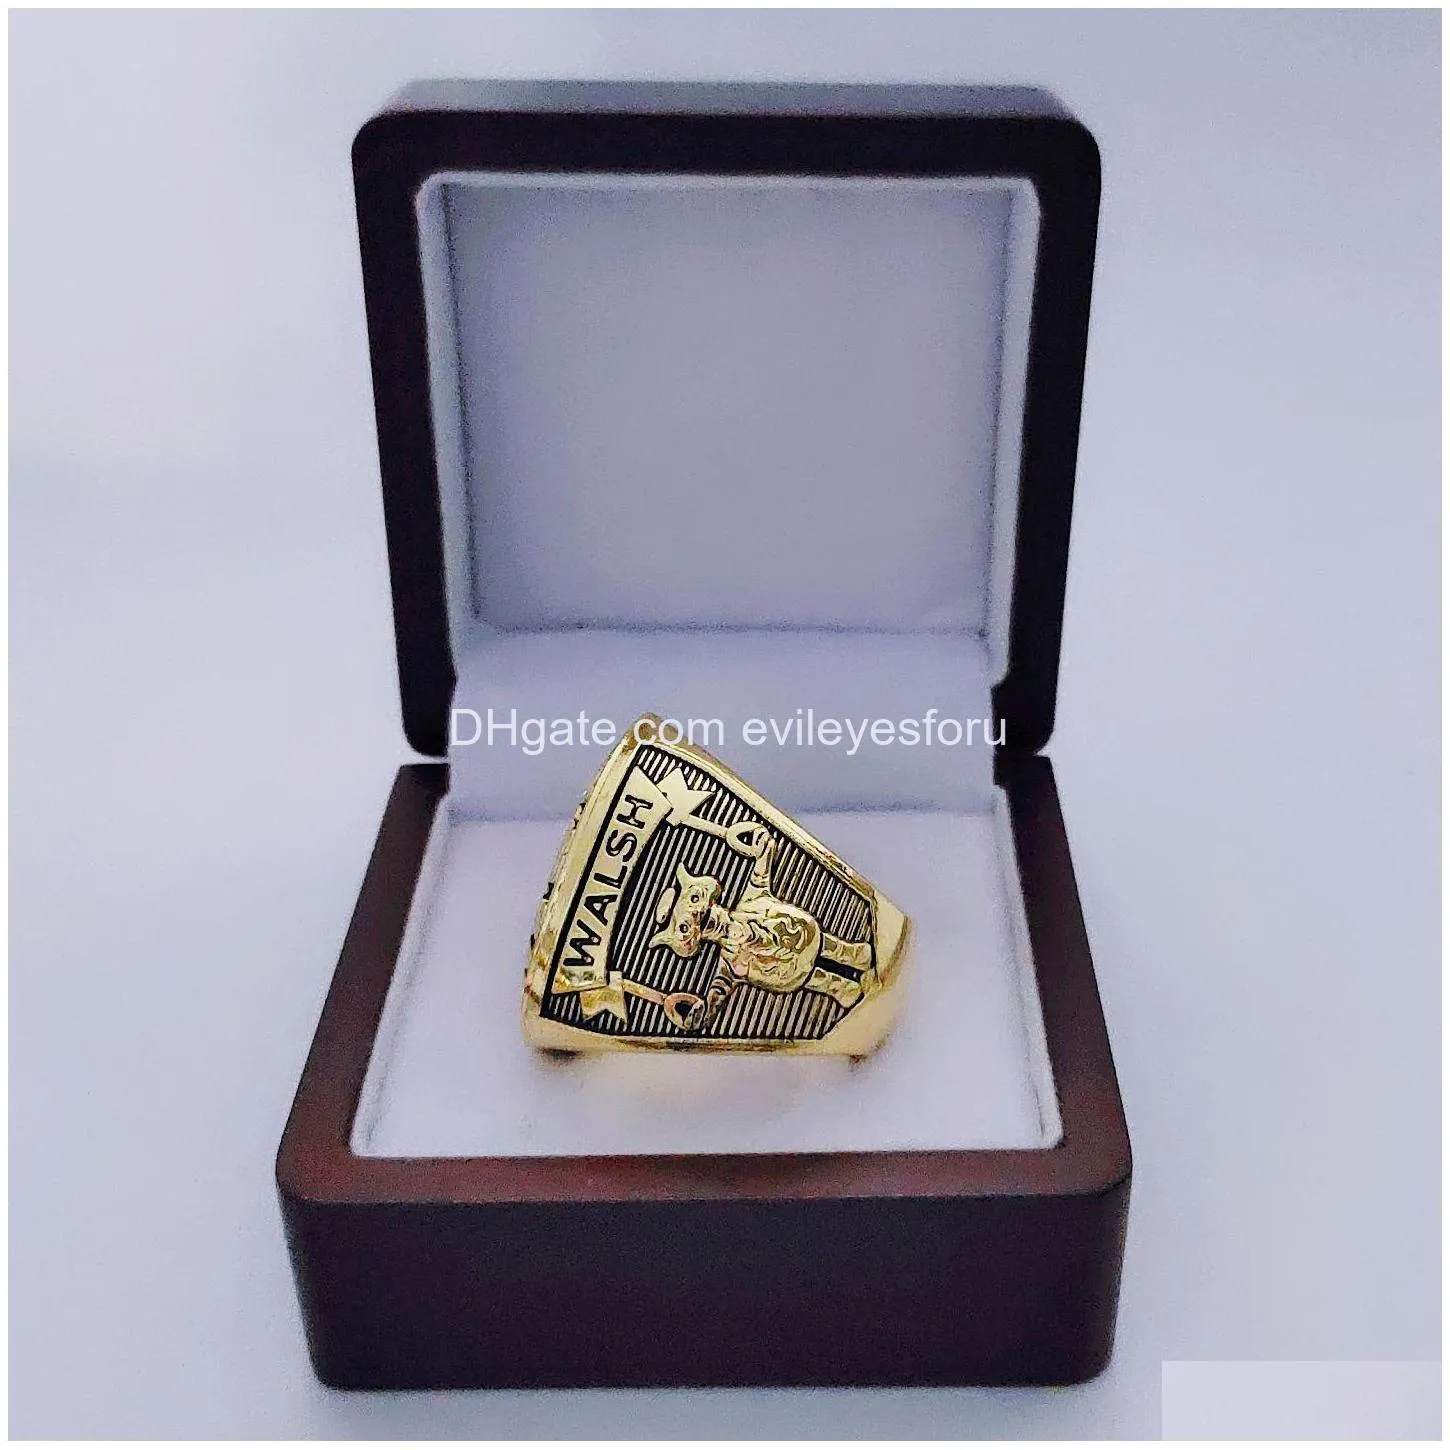 2020 wholesale 1997 championship ring fashion gifts from fans and friends leather bag parts accessories